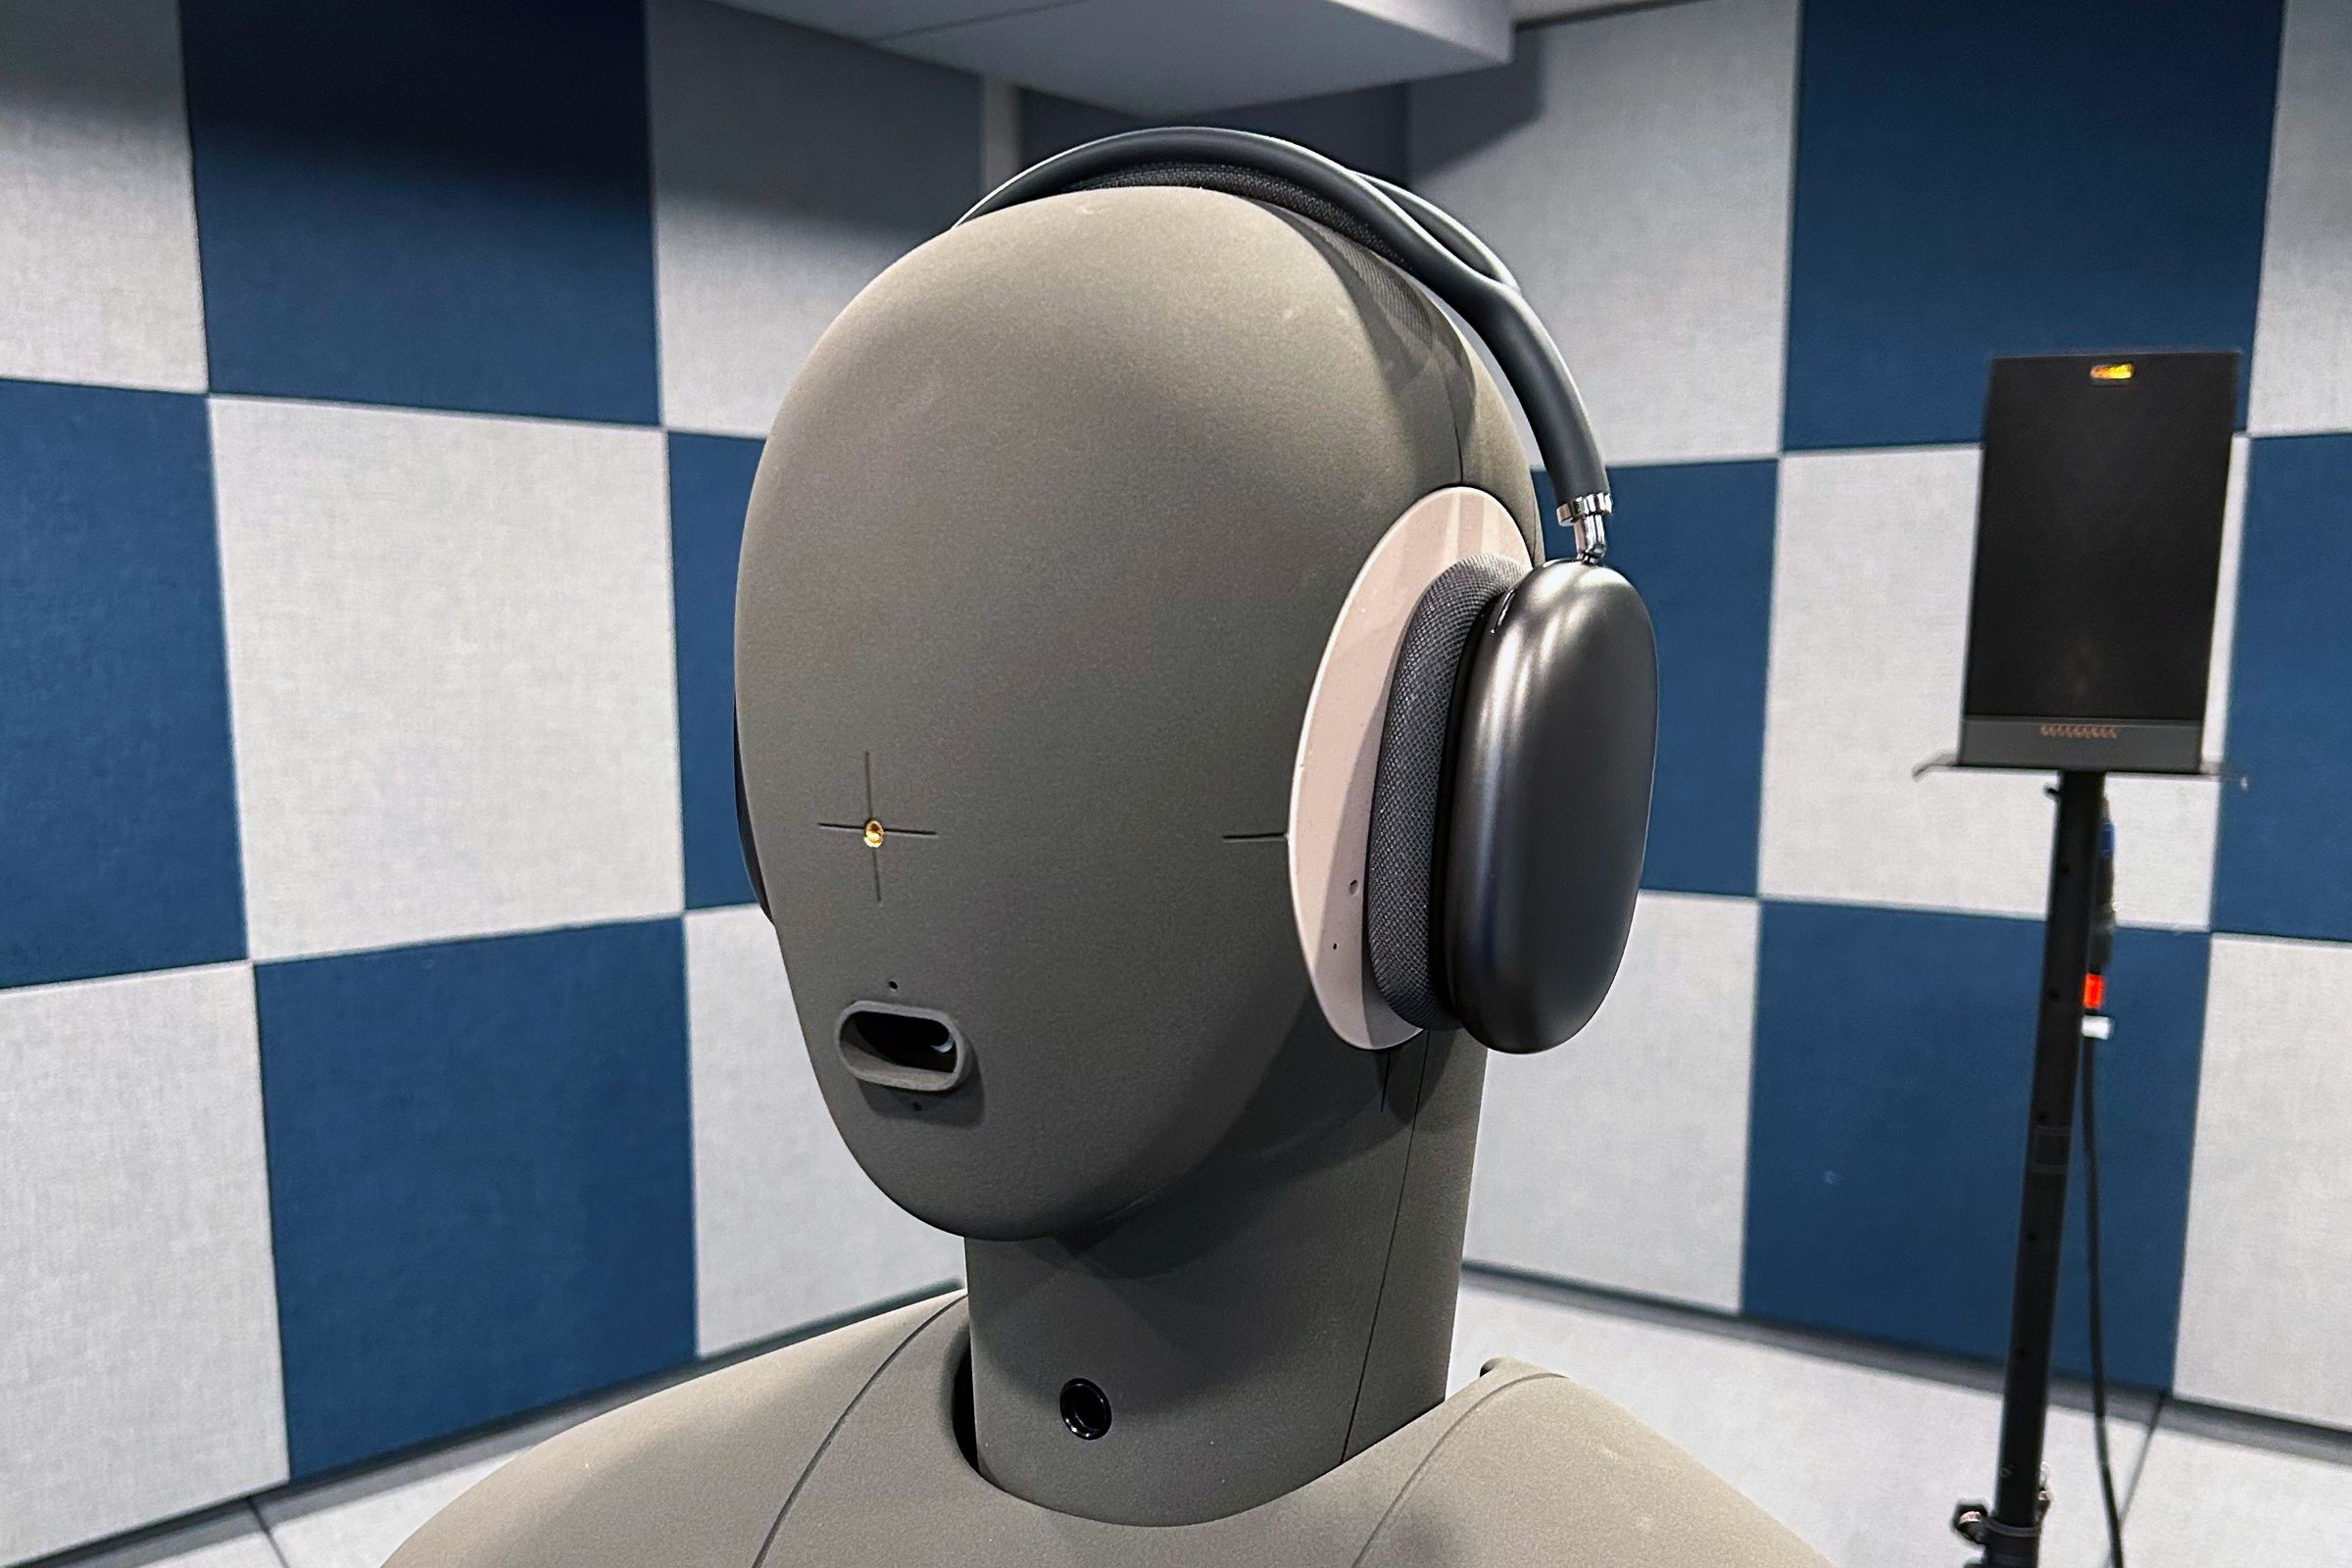 A pair of Apple AirPods Max headphones on a gray dummy head in a soundproof room.